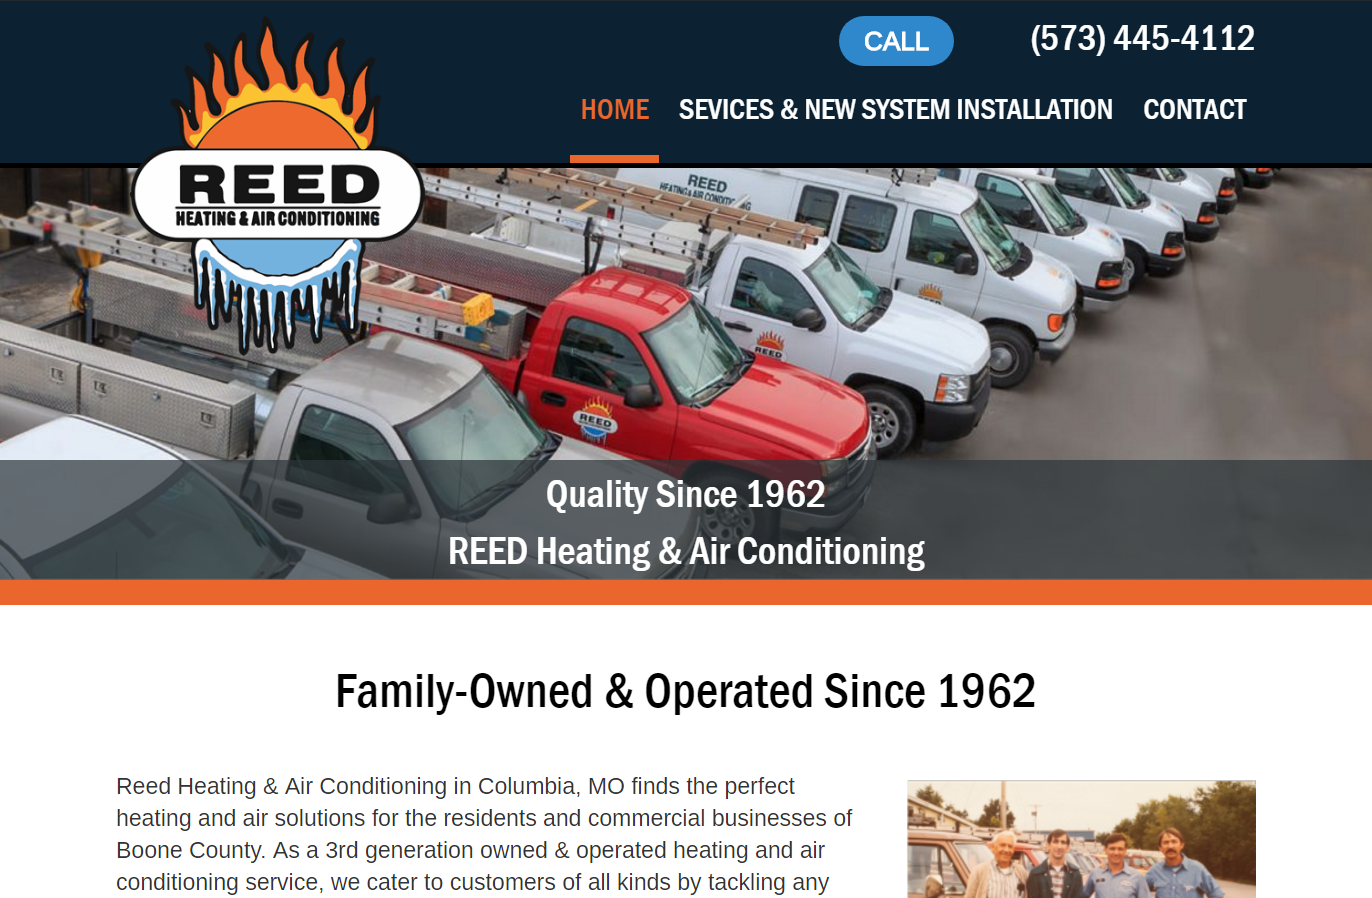 Reed Heating & Air Conditioning's new website